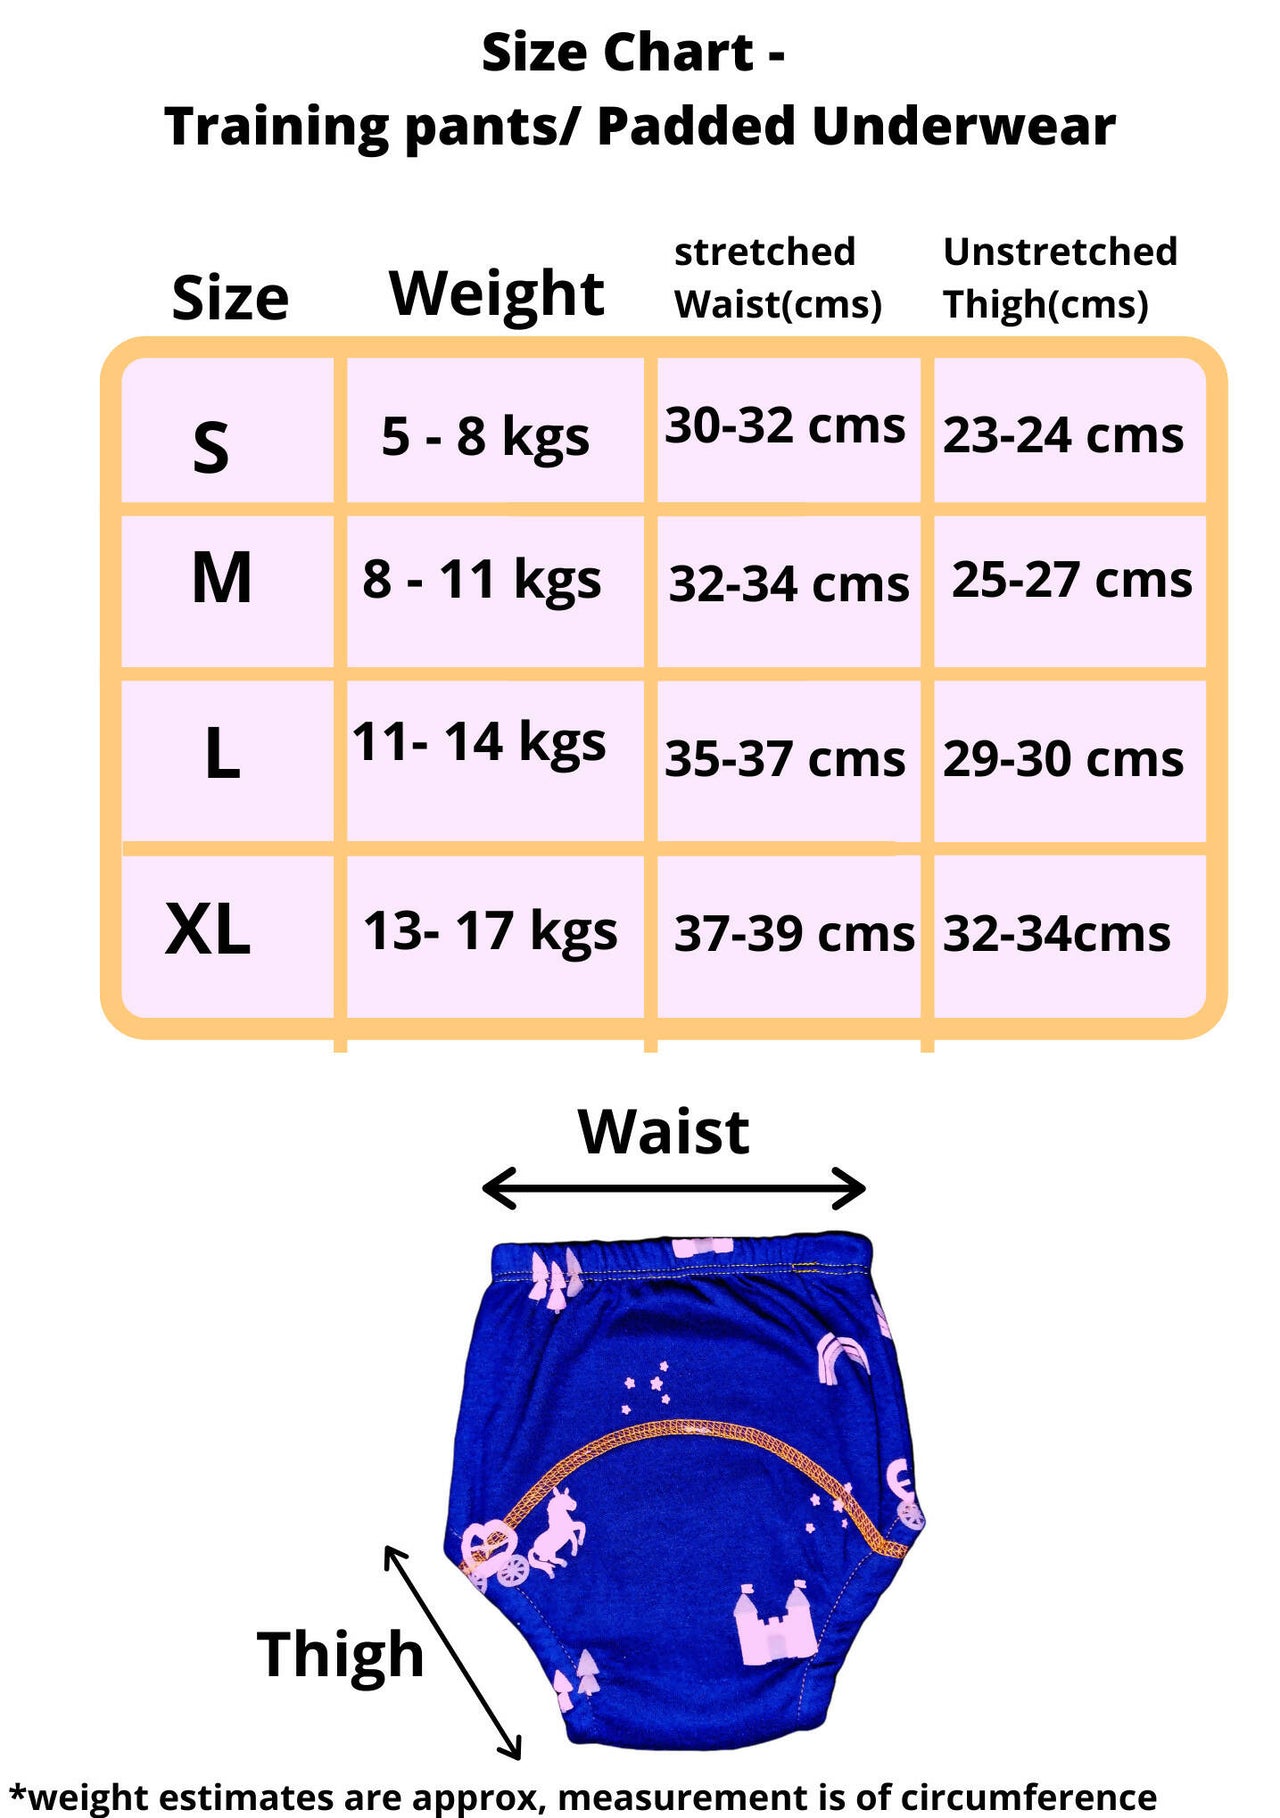 Kindermum Set Of 3- Cotton Padded Pull Up Training Pants/ Padded Underwear For Kids Rugby Animals Rains-Set of 3 PCs - Distacart